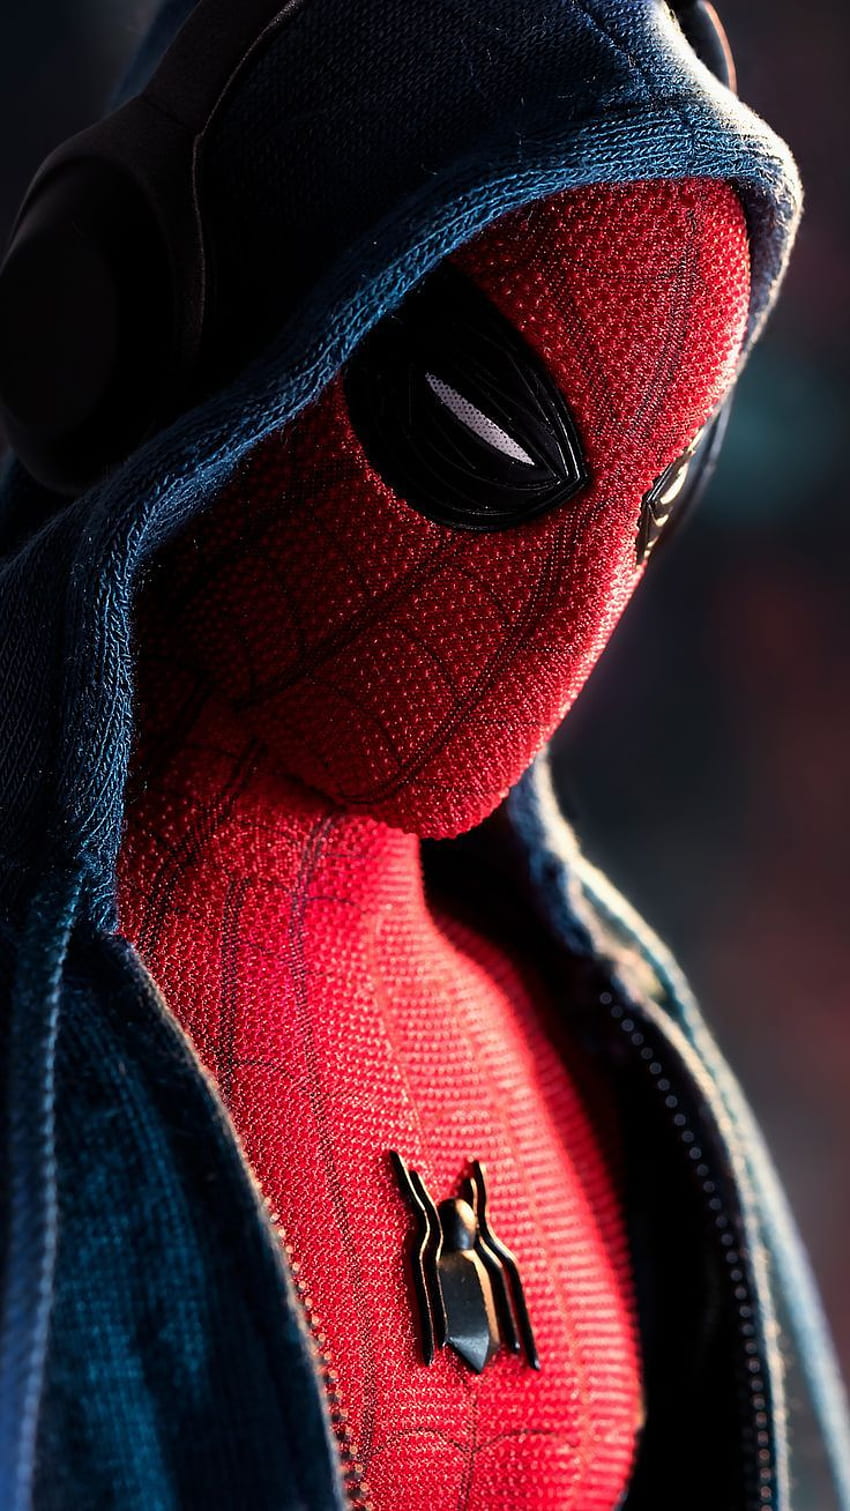 Spiderman Far From Home 2019 Poster 4K Ultra HD Mobile Wallpaper